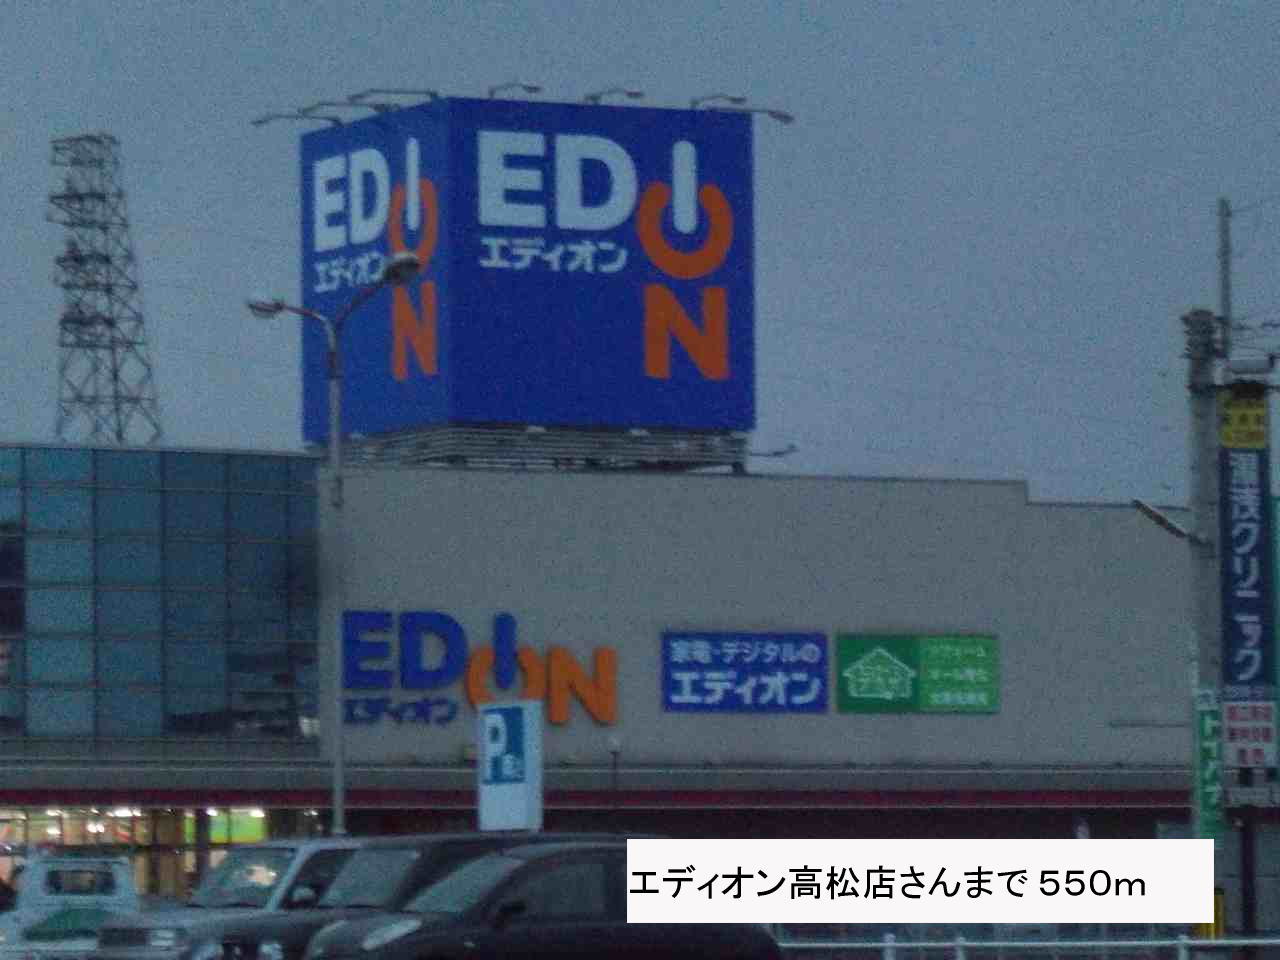 Other. EDION Takamatsu store up to (other) 550m